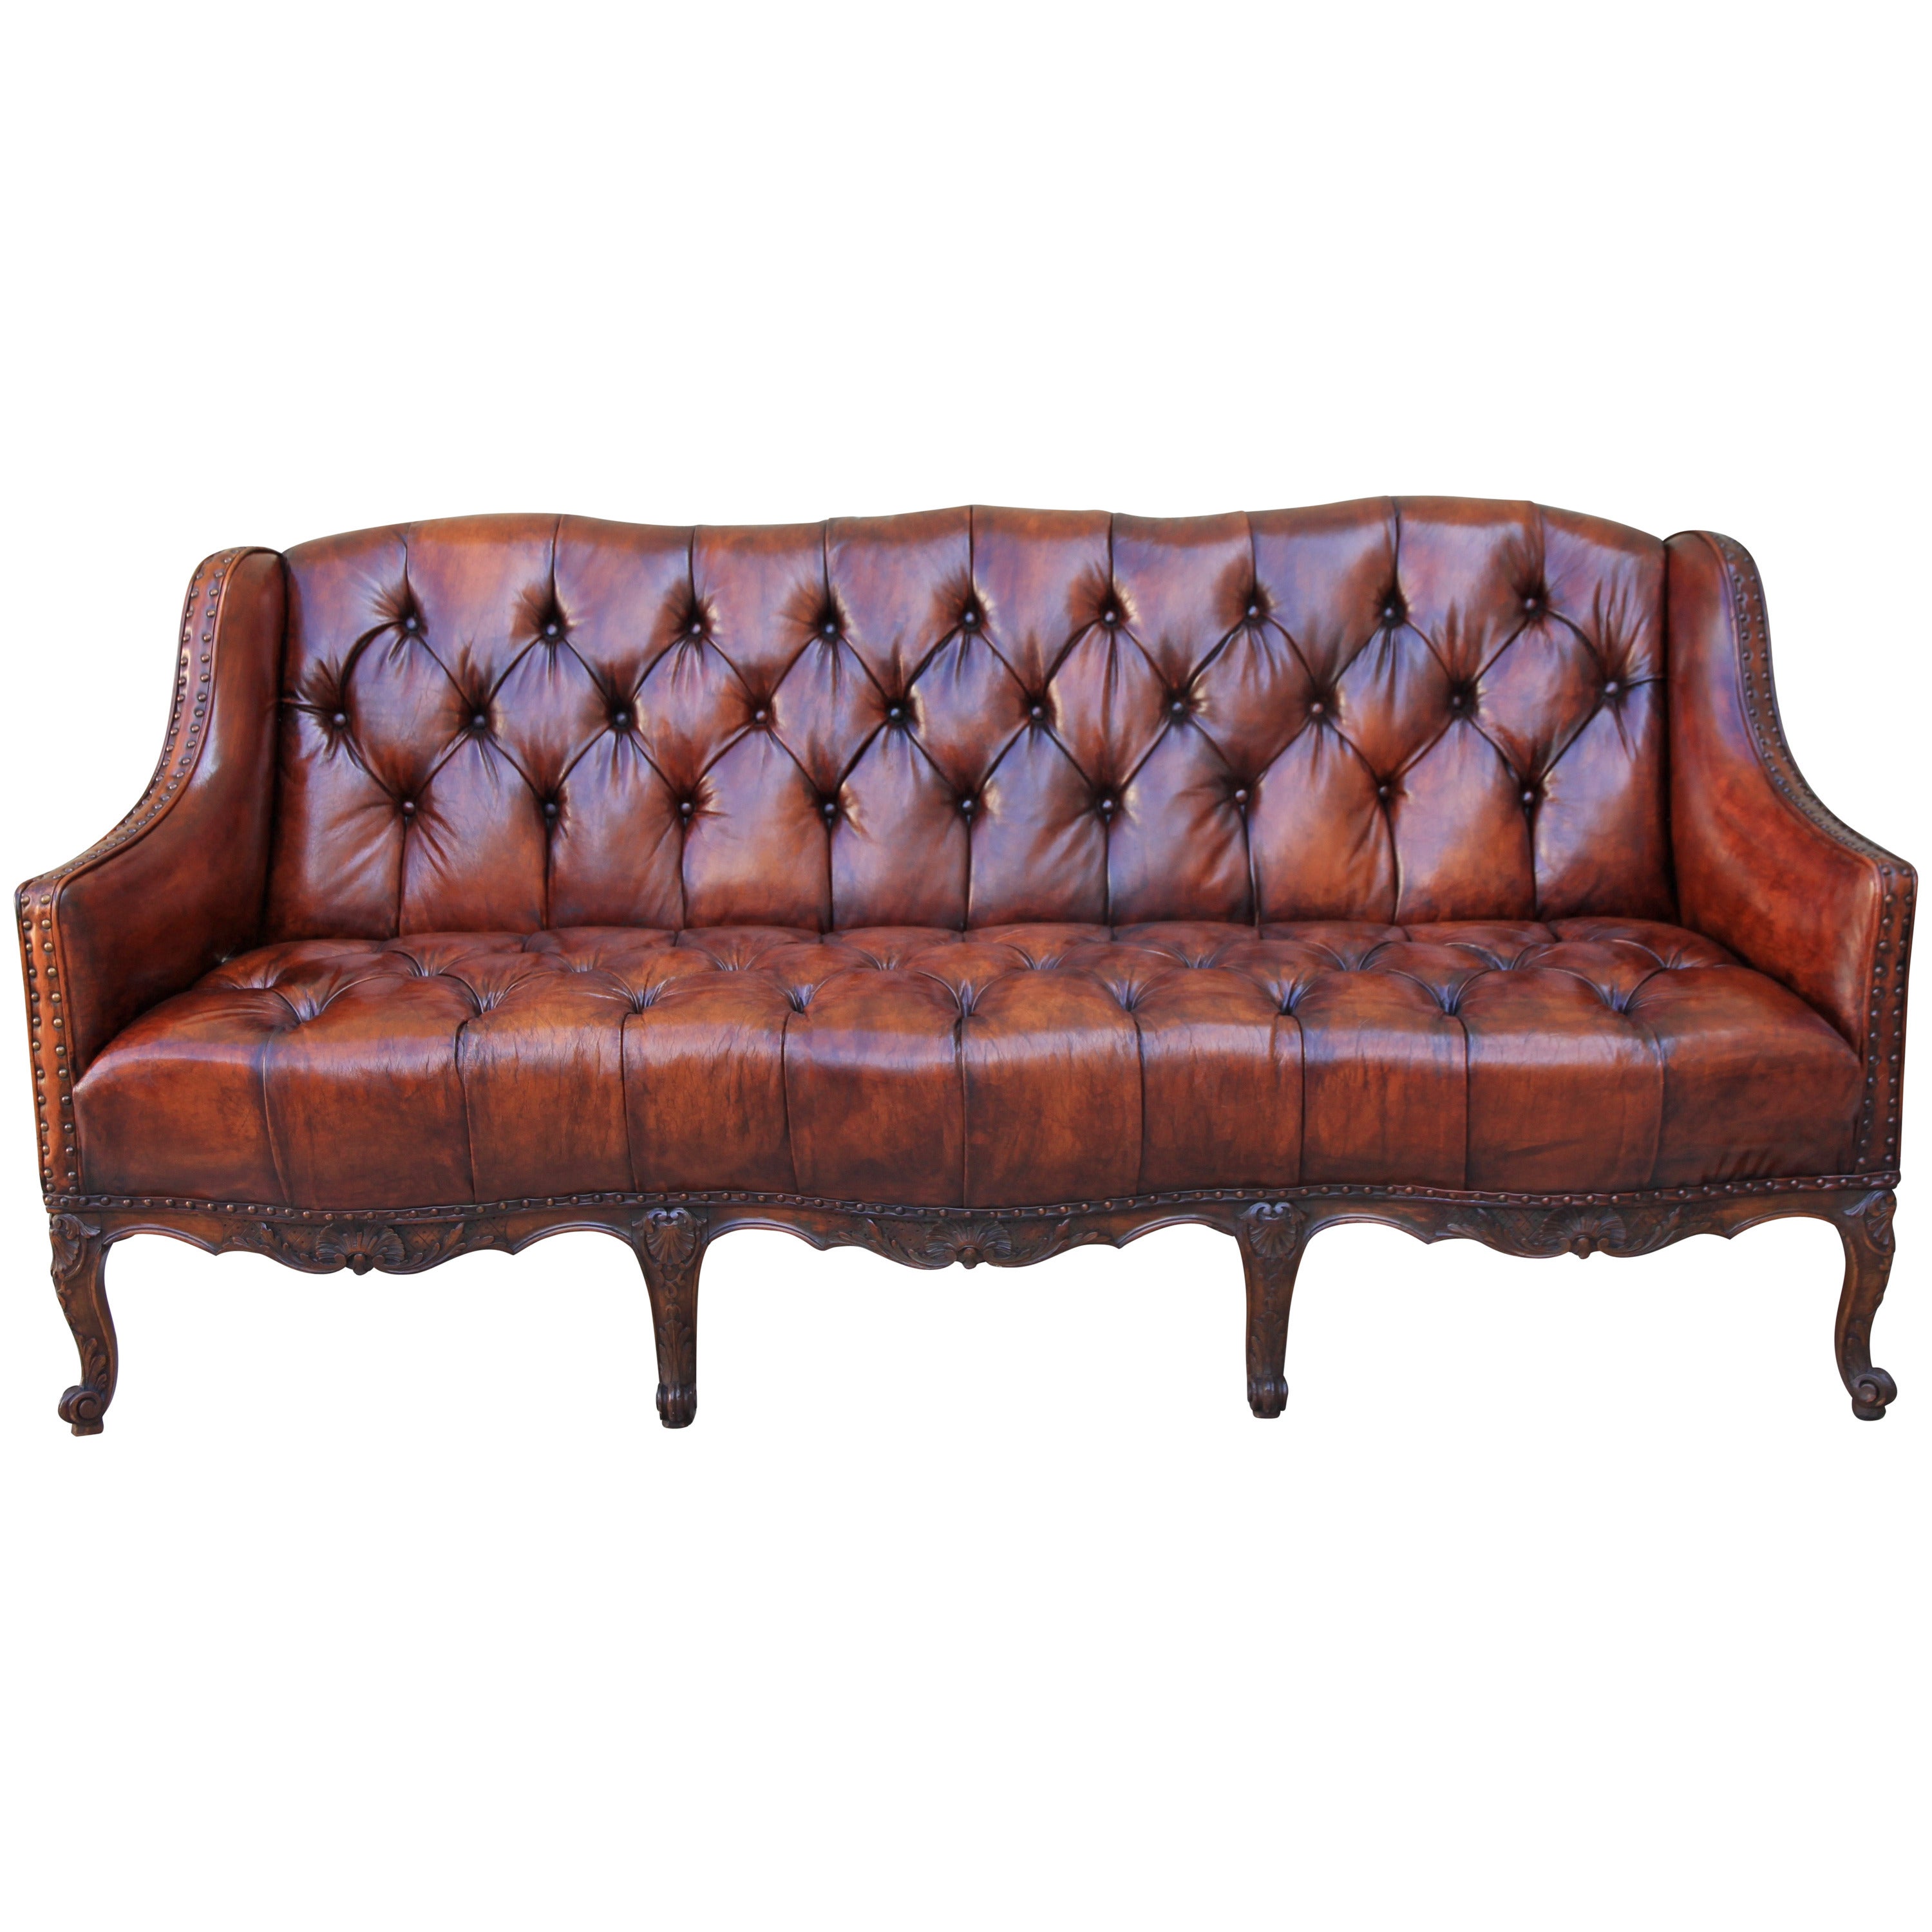 19th Century French Leather Tufted Sofa